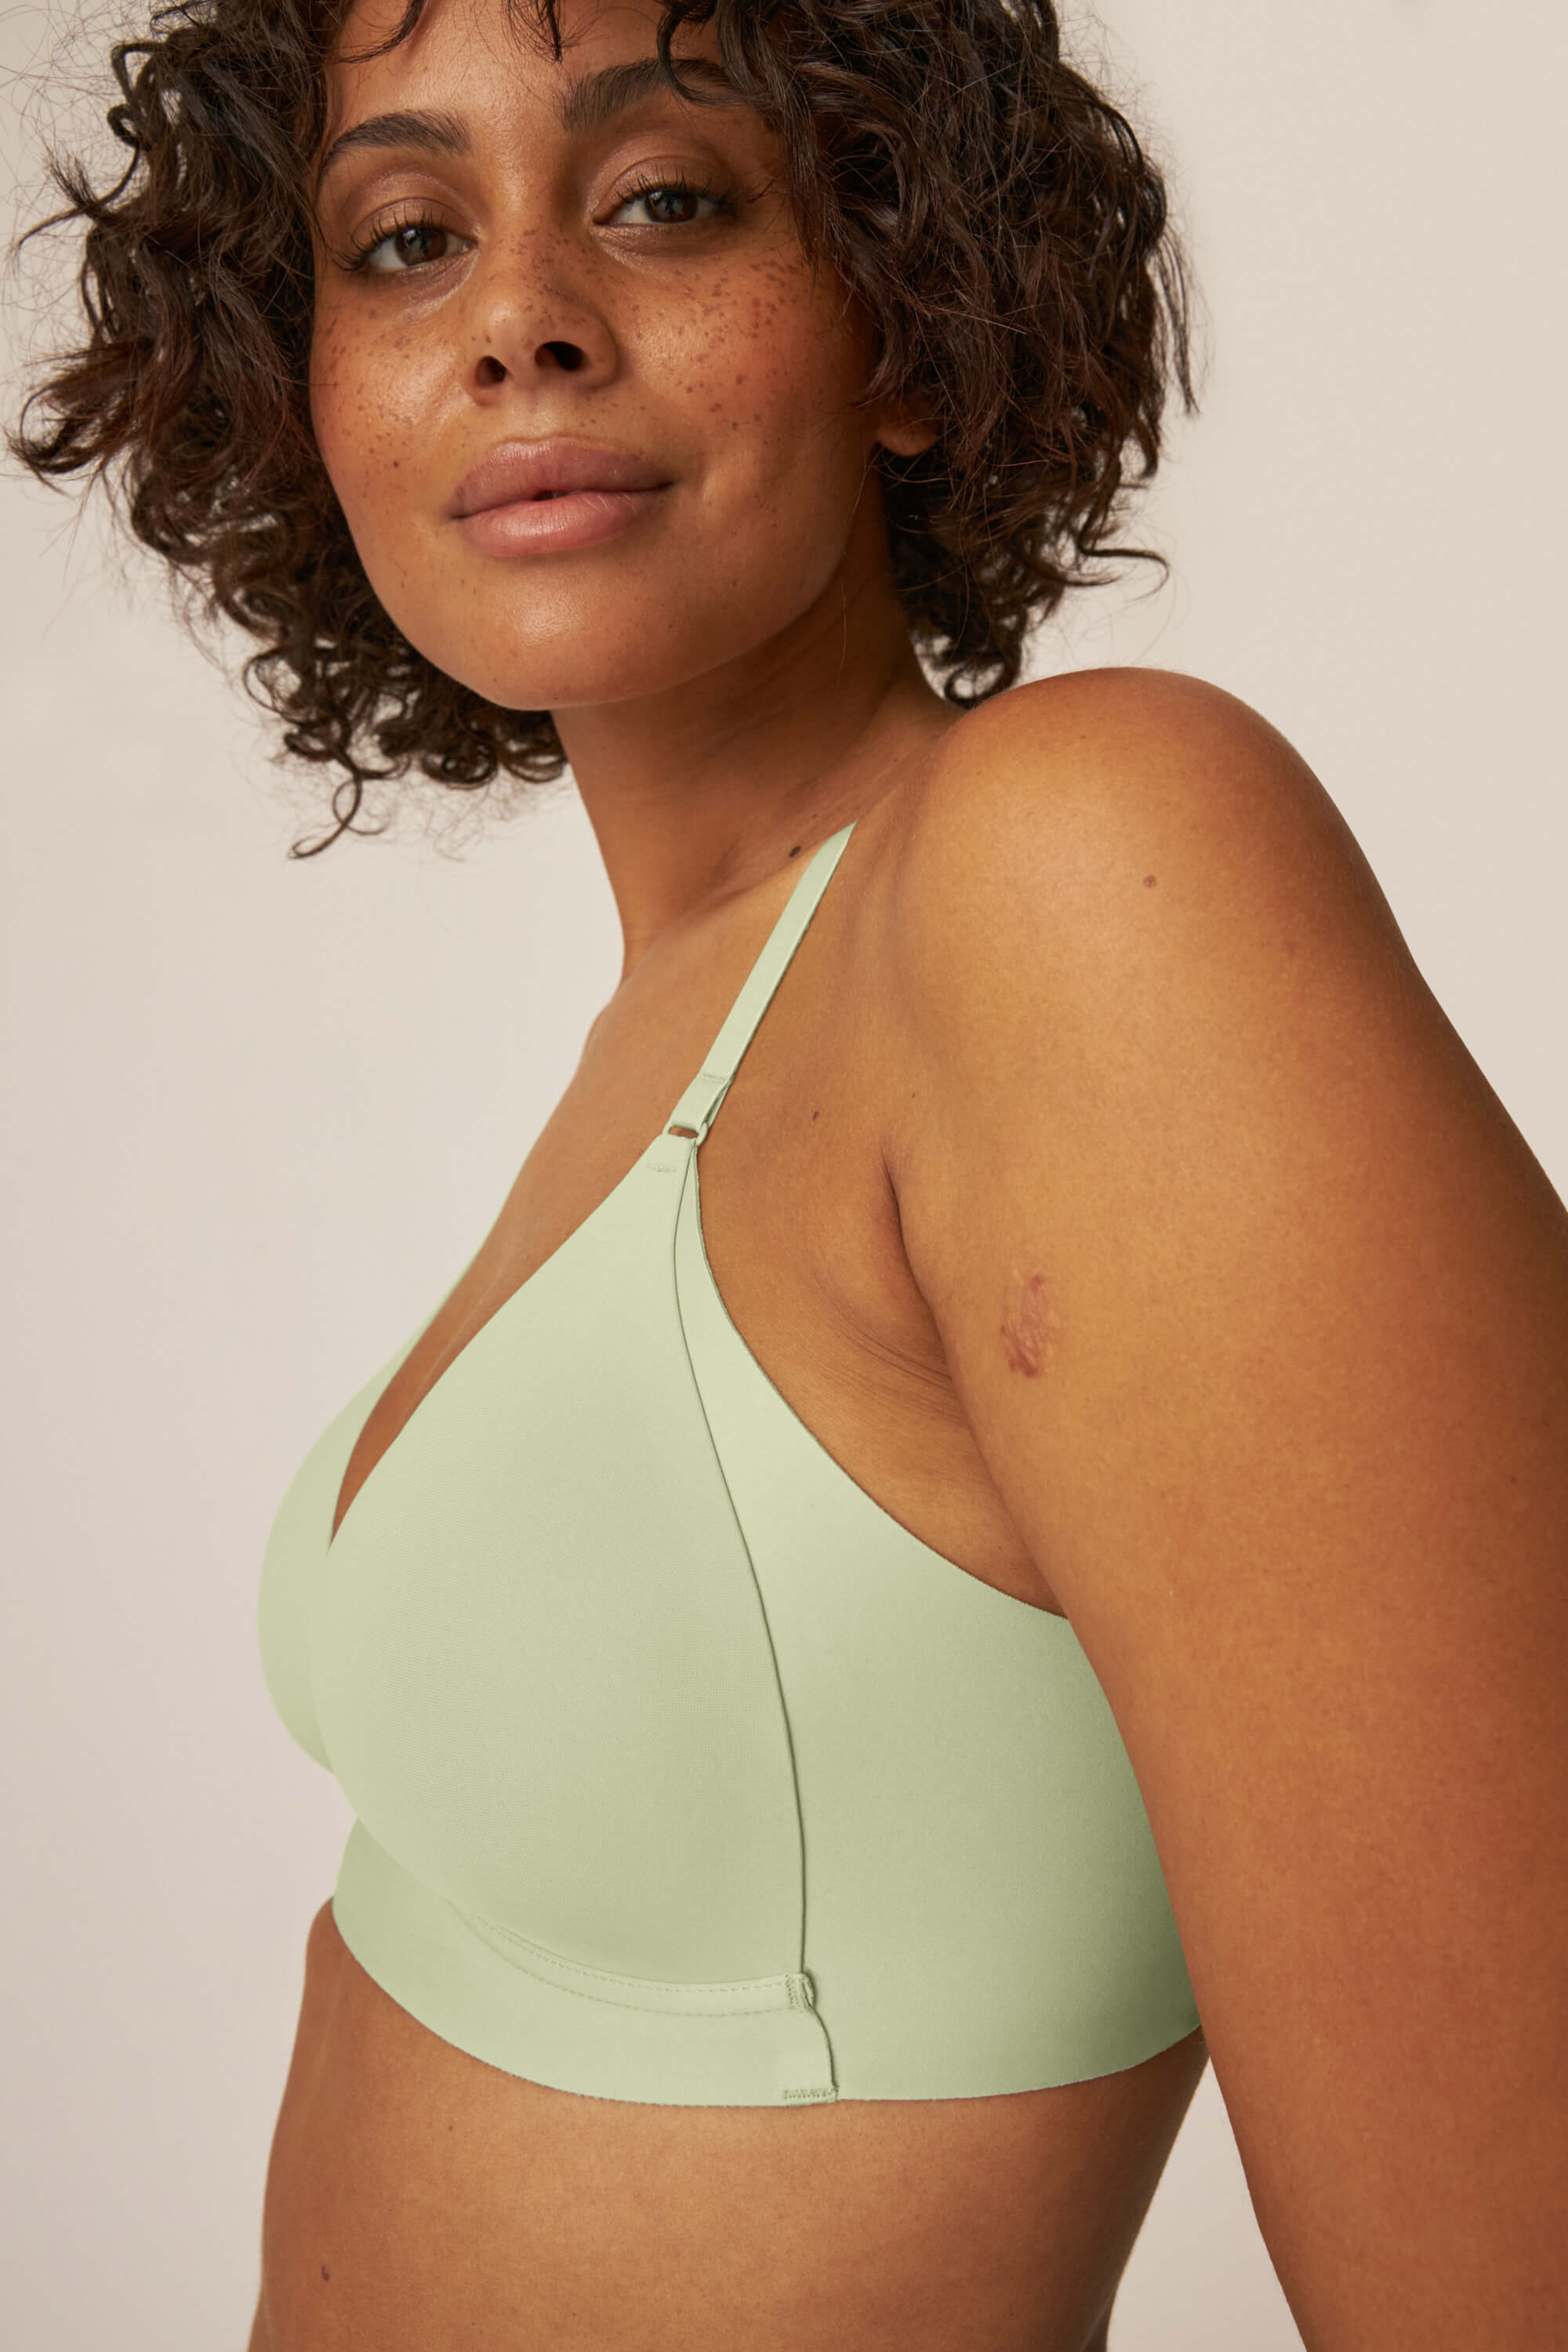 Soft bra with side smoother effect - Pale Greenshield